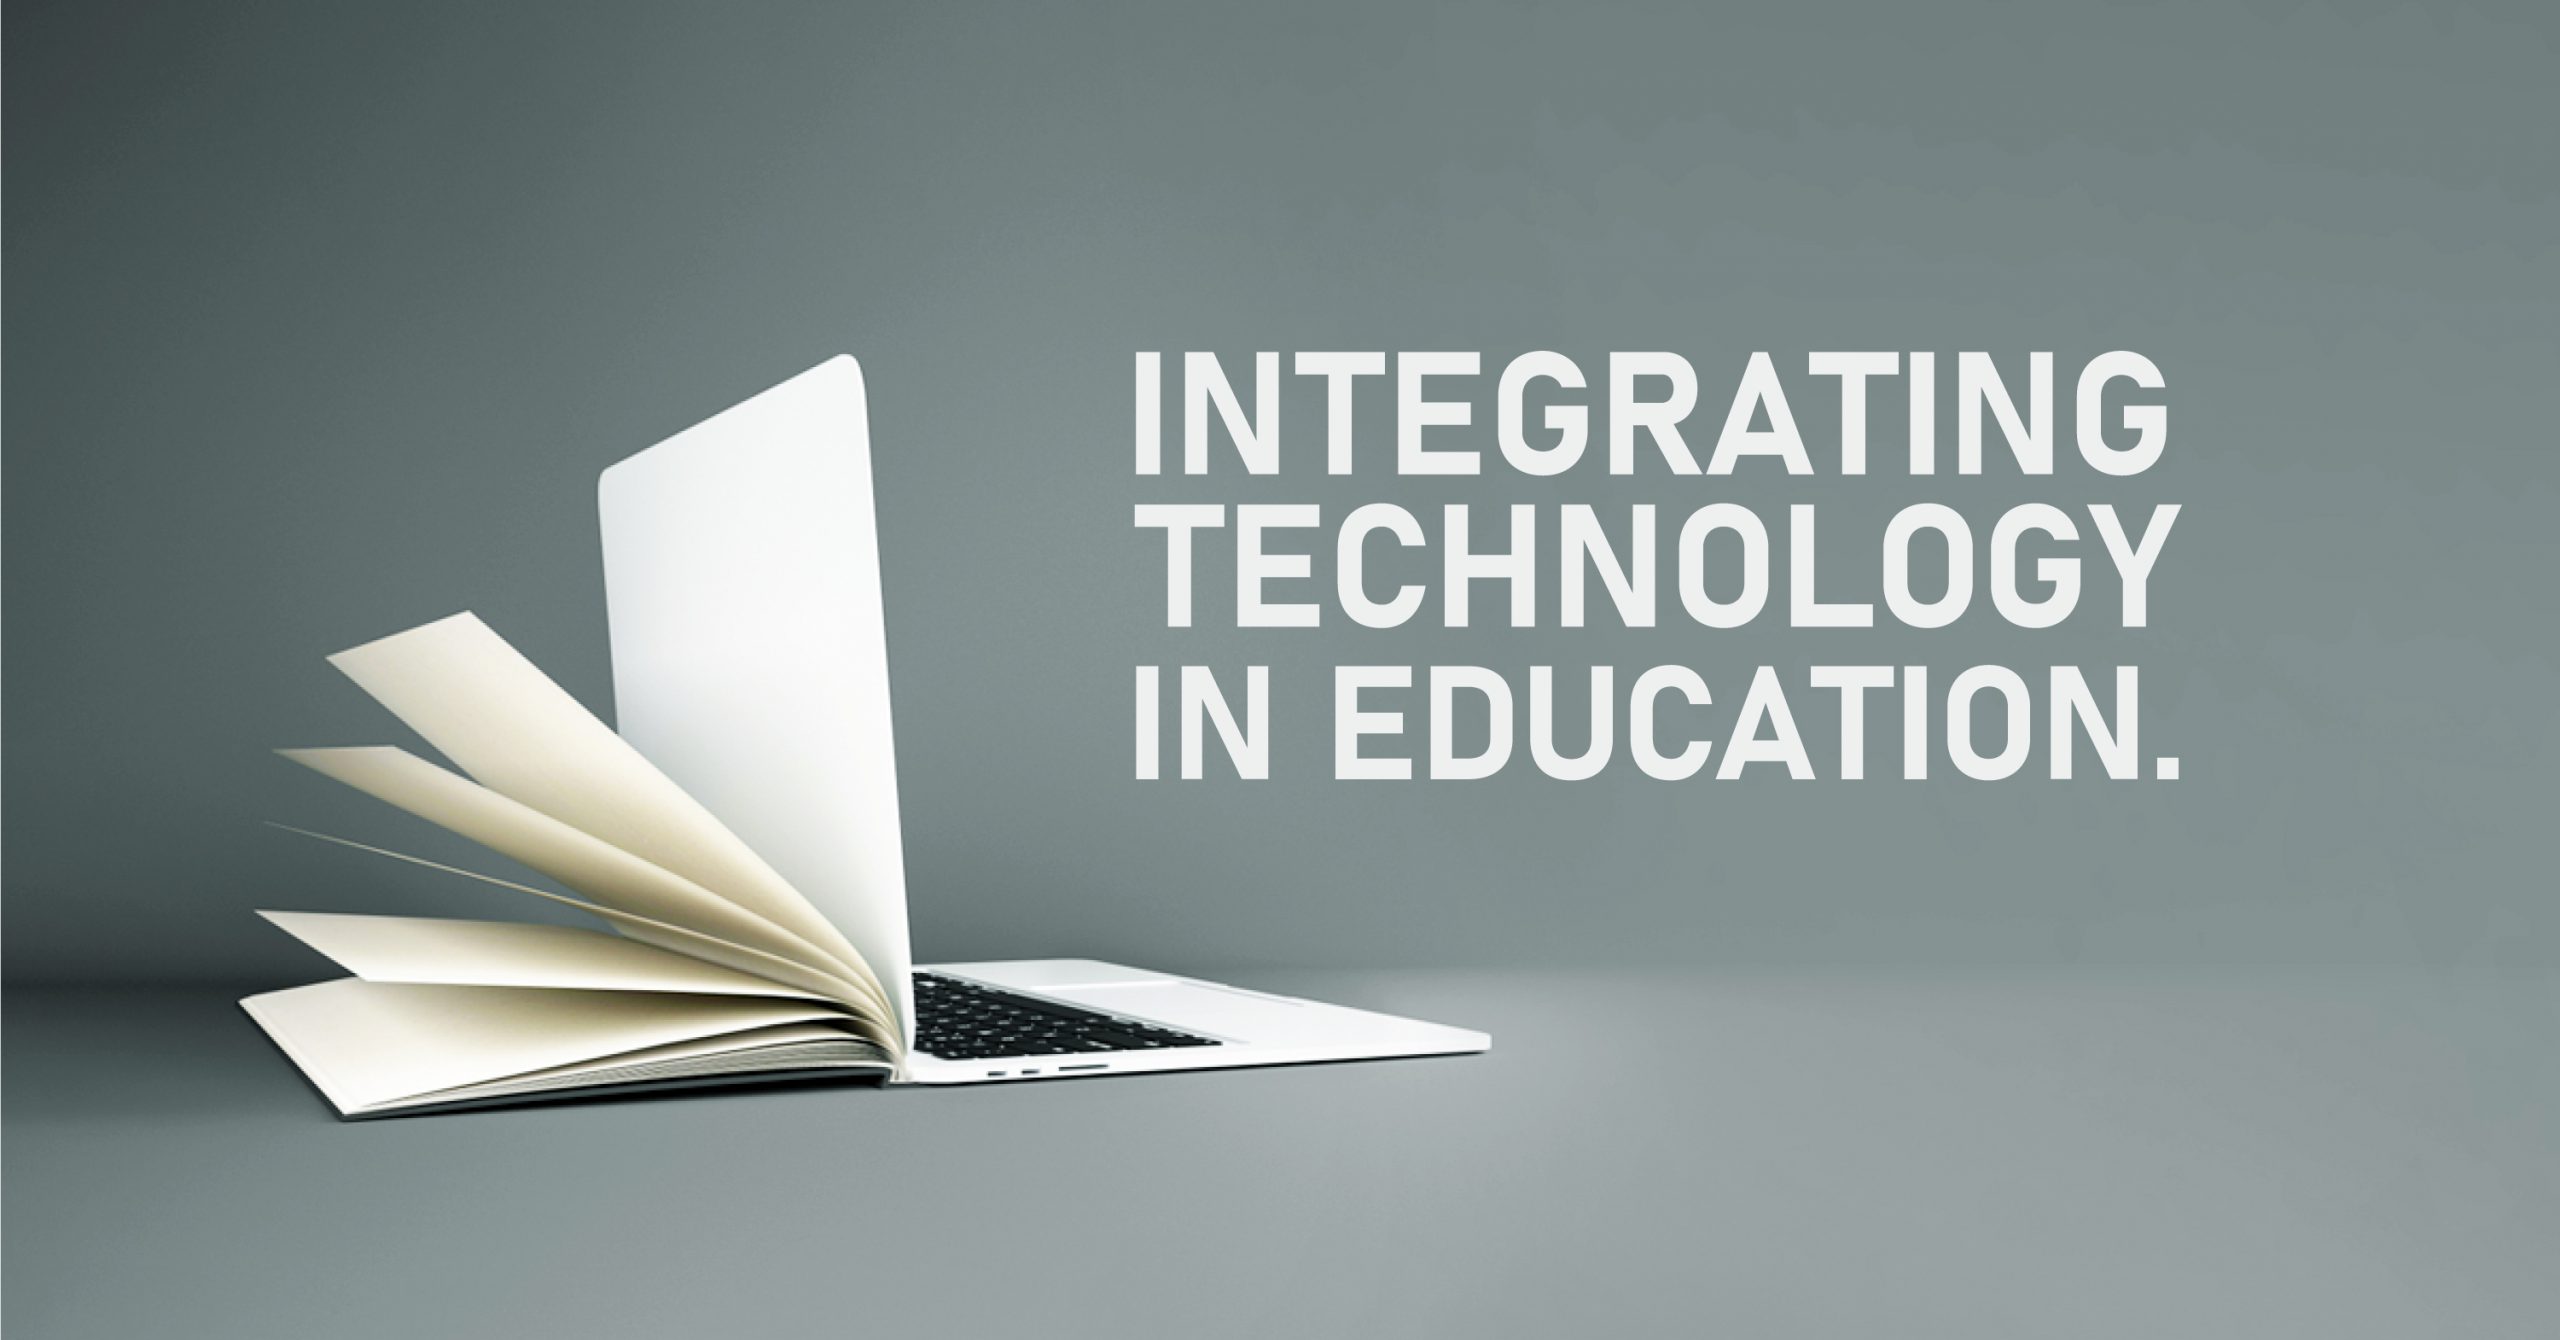 definition of integration of technology in education